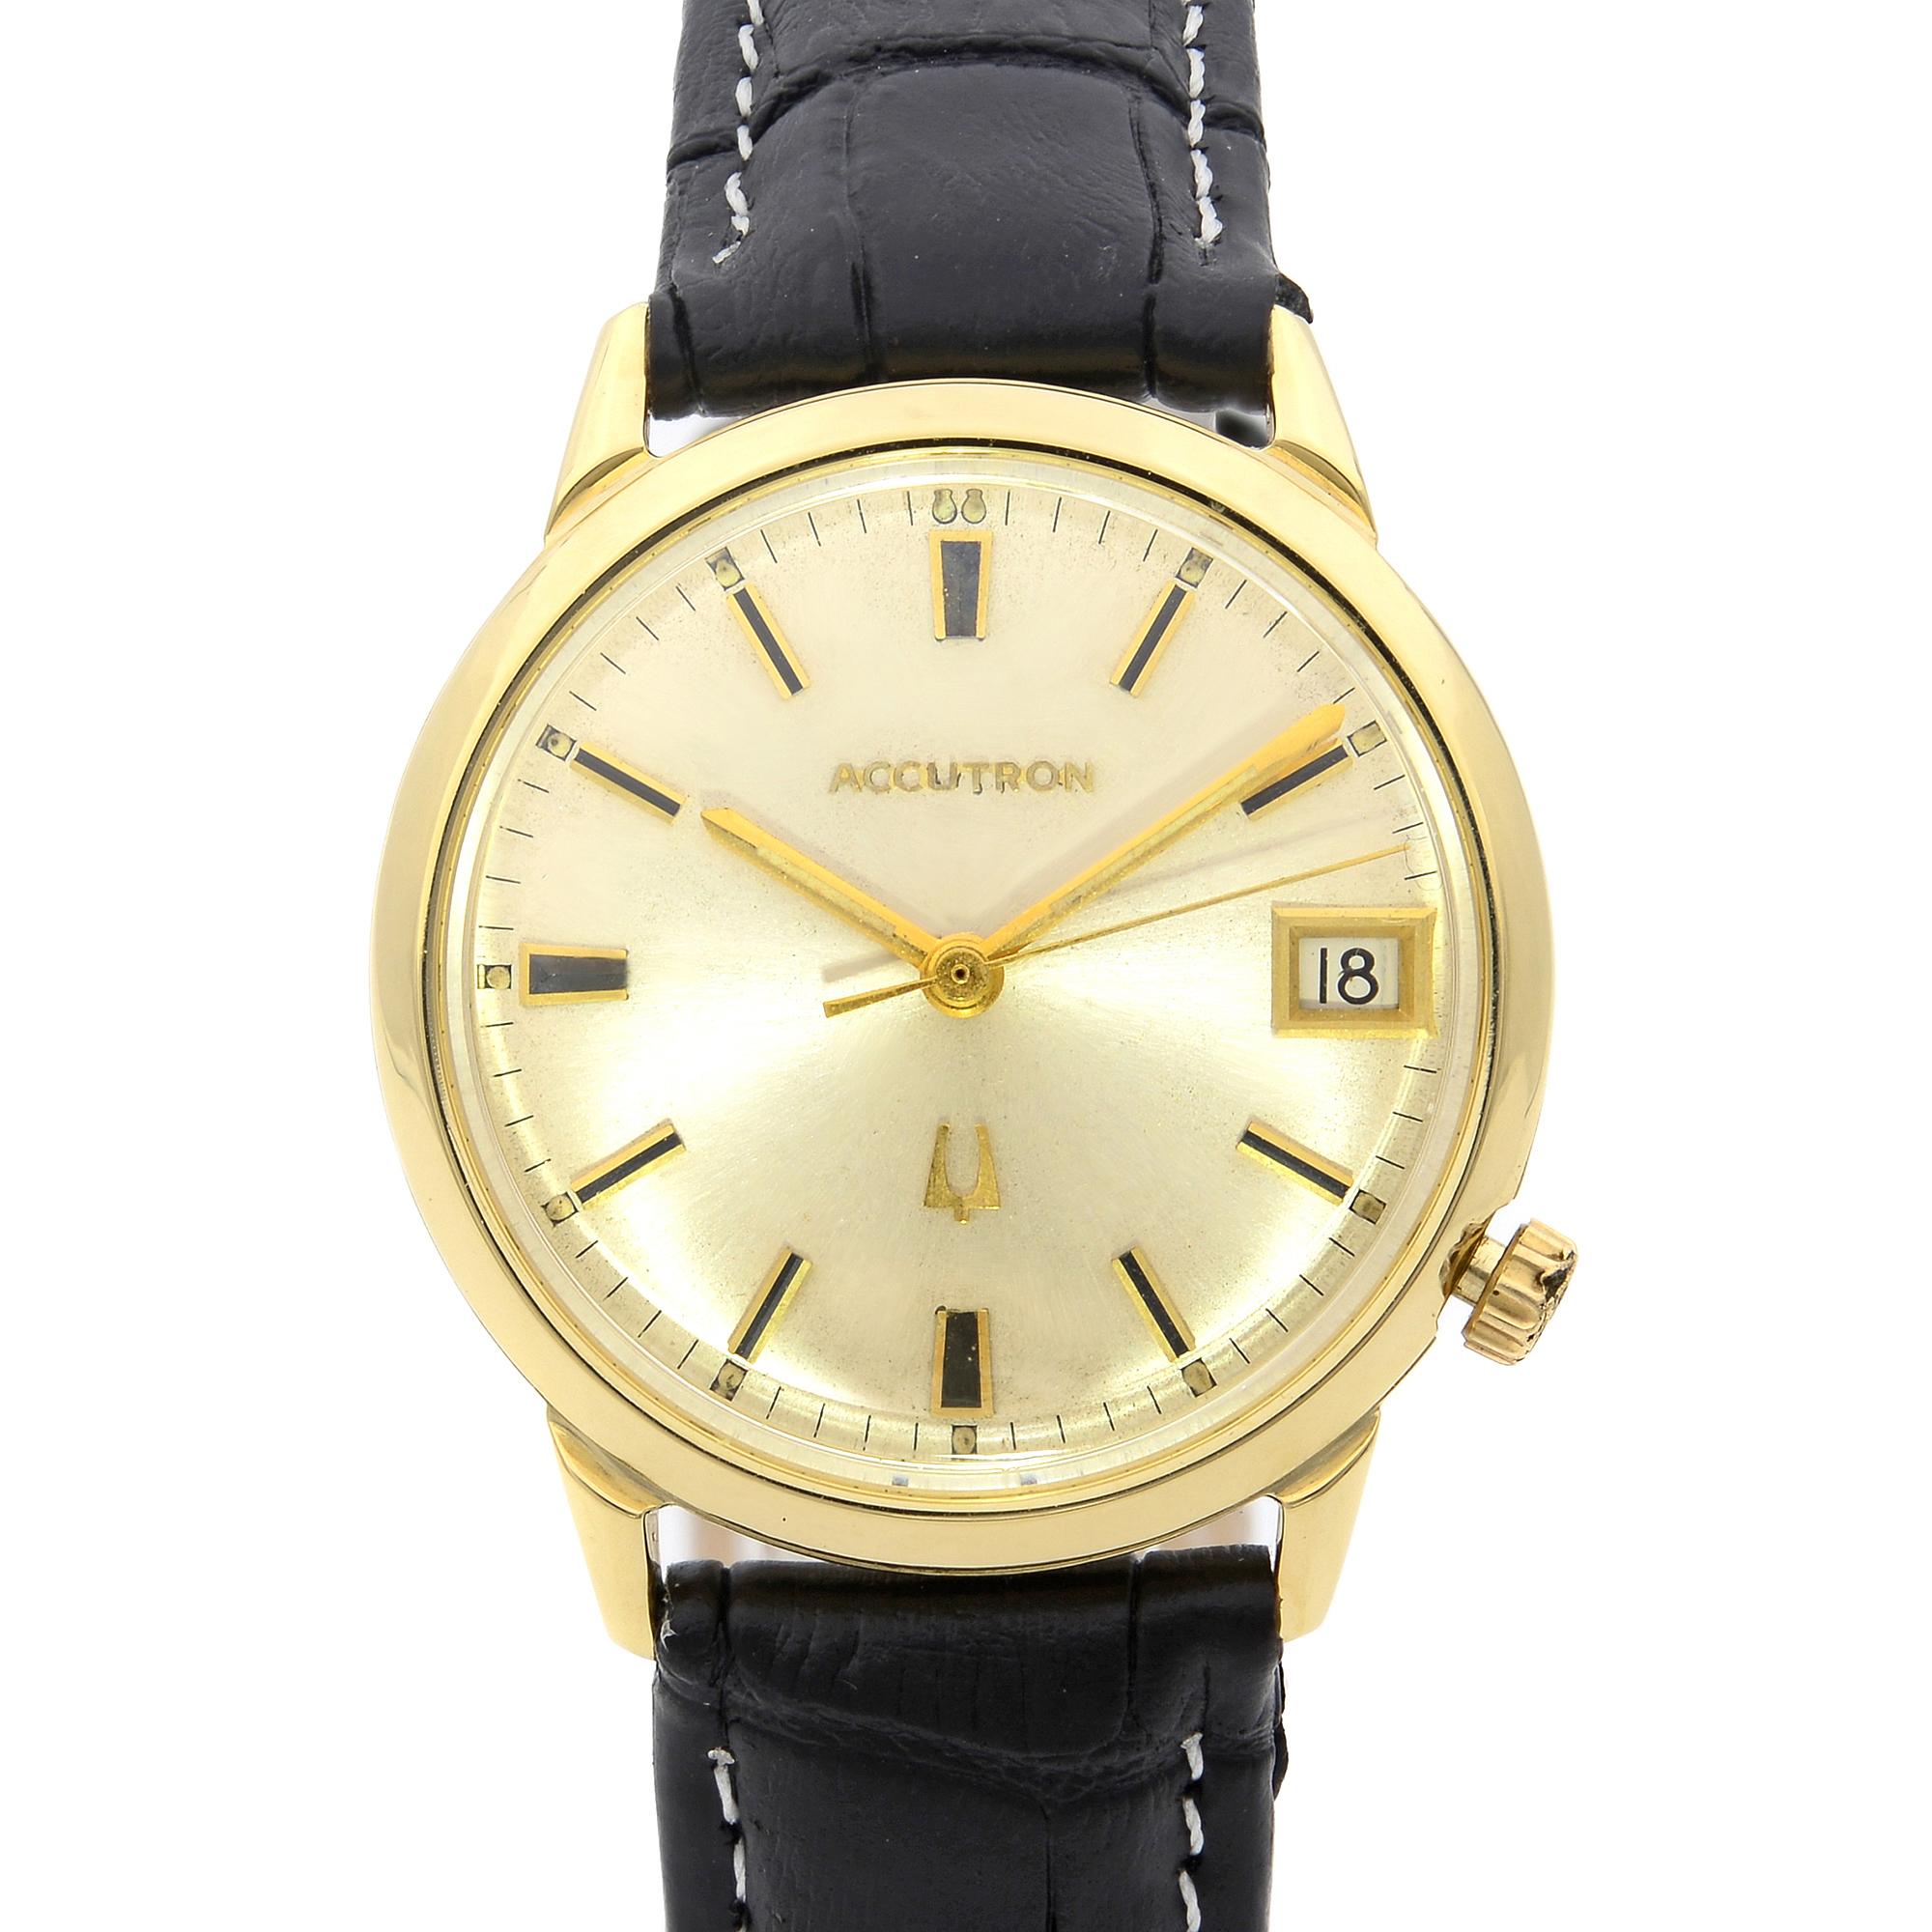 This pre-owned Bulova  NA is a beautiful men's timepiece that is powered by quartz (battery) movement which is cased in a yellow gold case. It has a round shape face, date indicator dial and has hand sticks style markers. It is completed with a